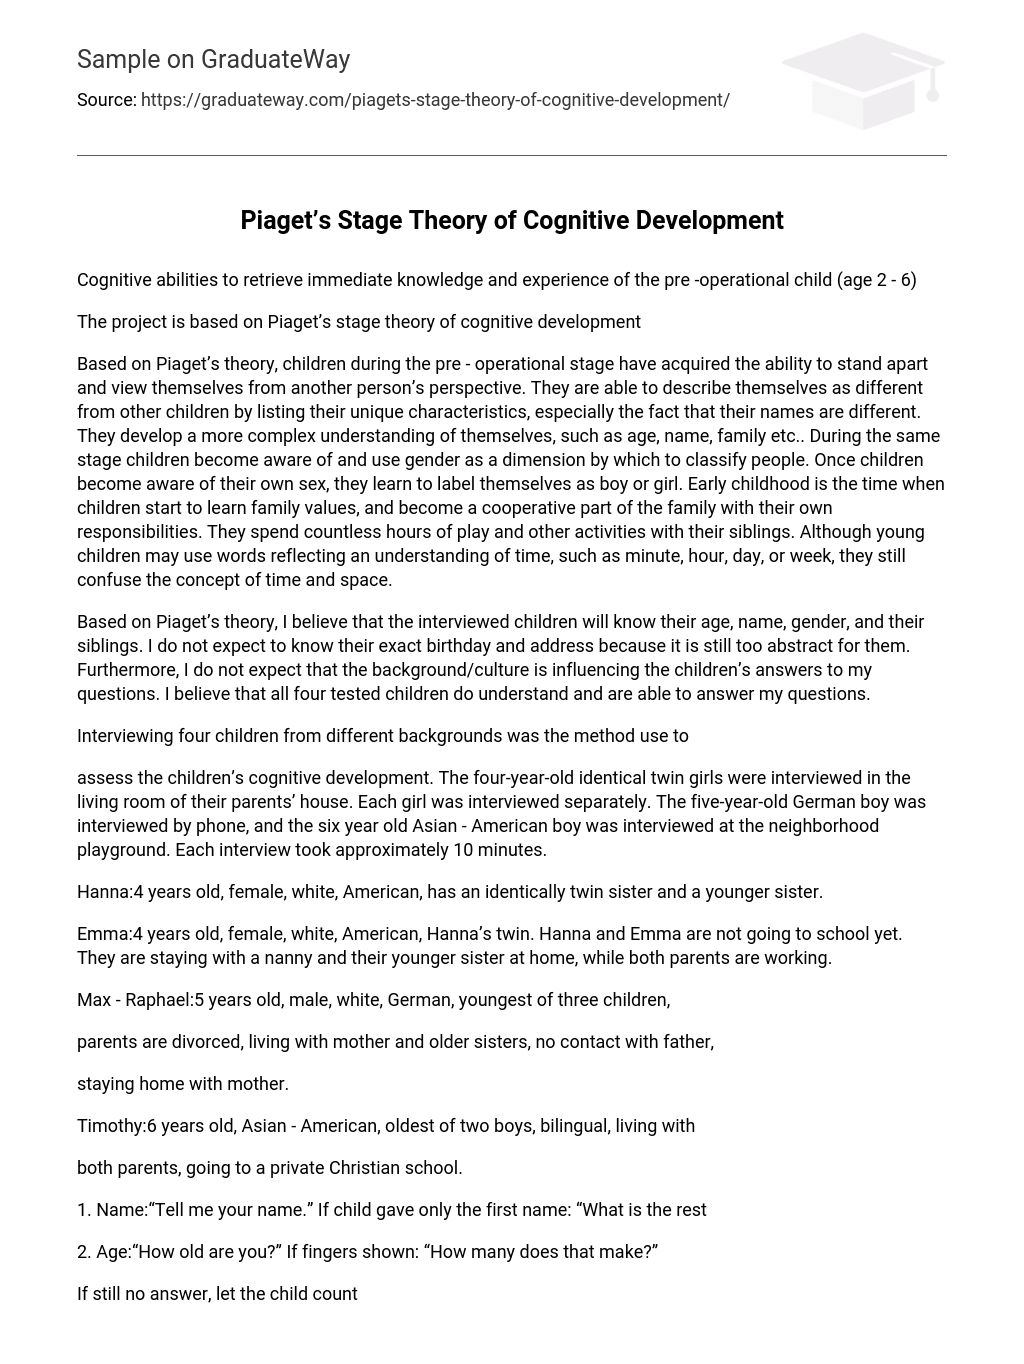 Piaget’s Stage Theory of Cognitive Development